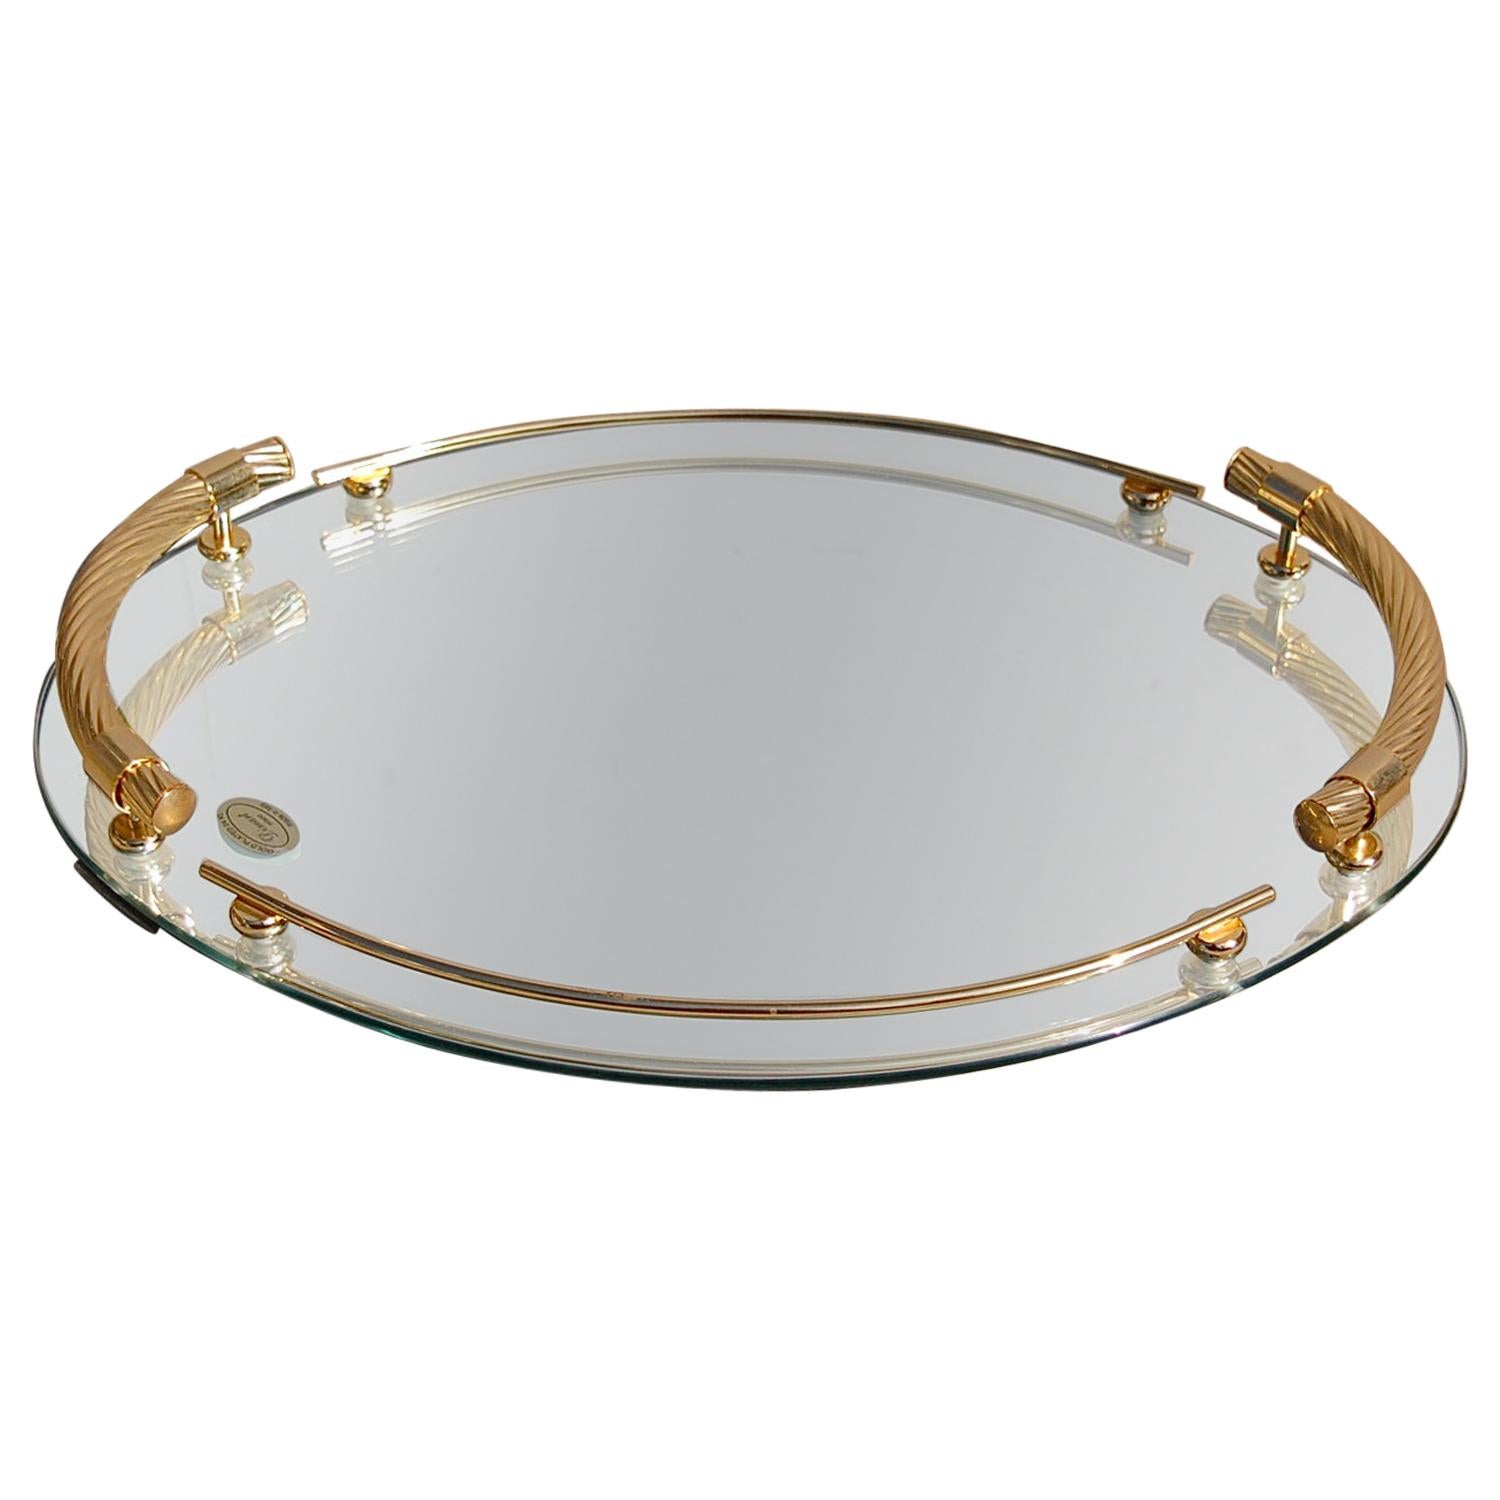 Gold-Plated Oval Mirrored Tray by Dimart Milano Italy, 1980s